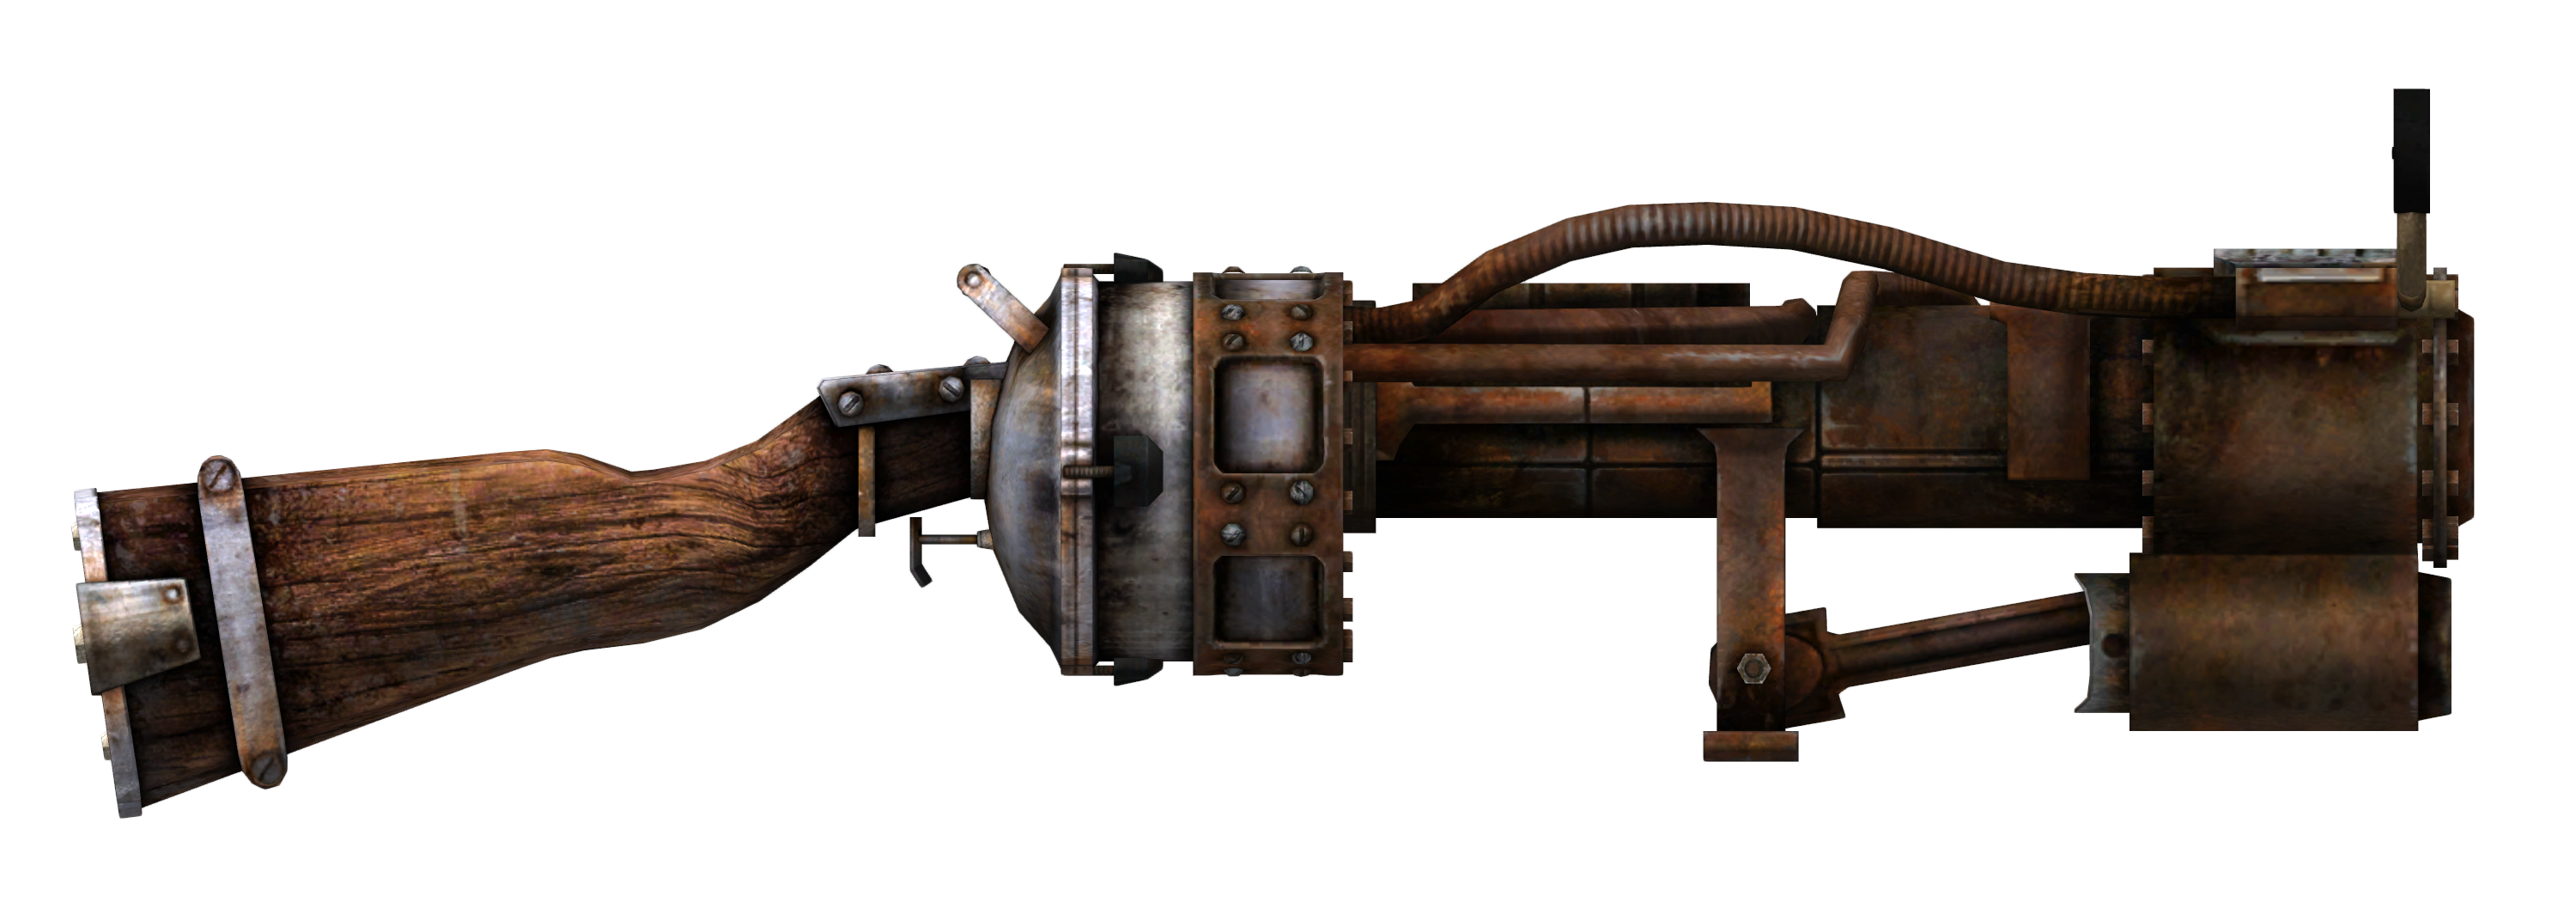 all weapons in fallout new vegas